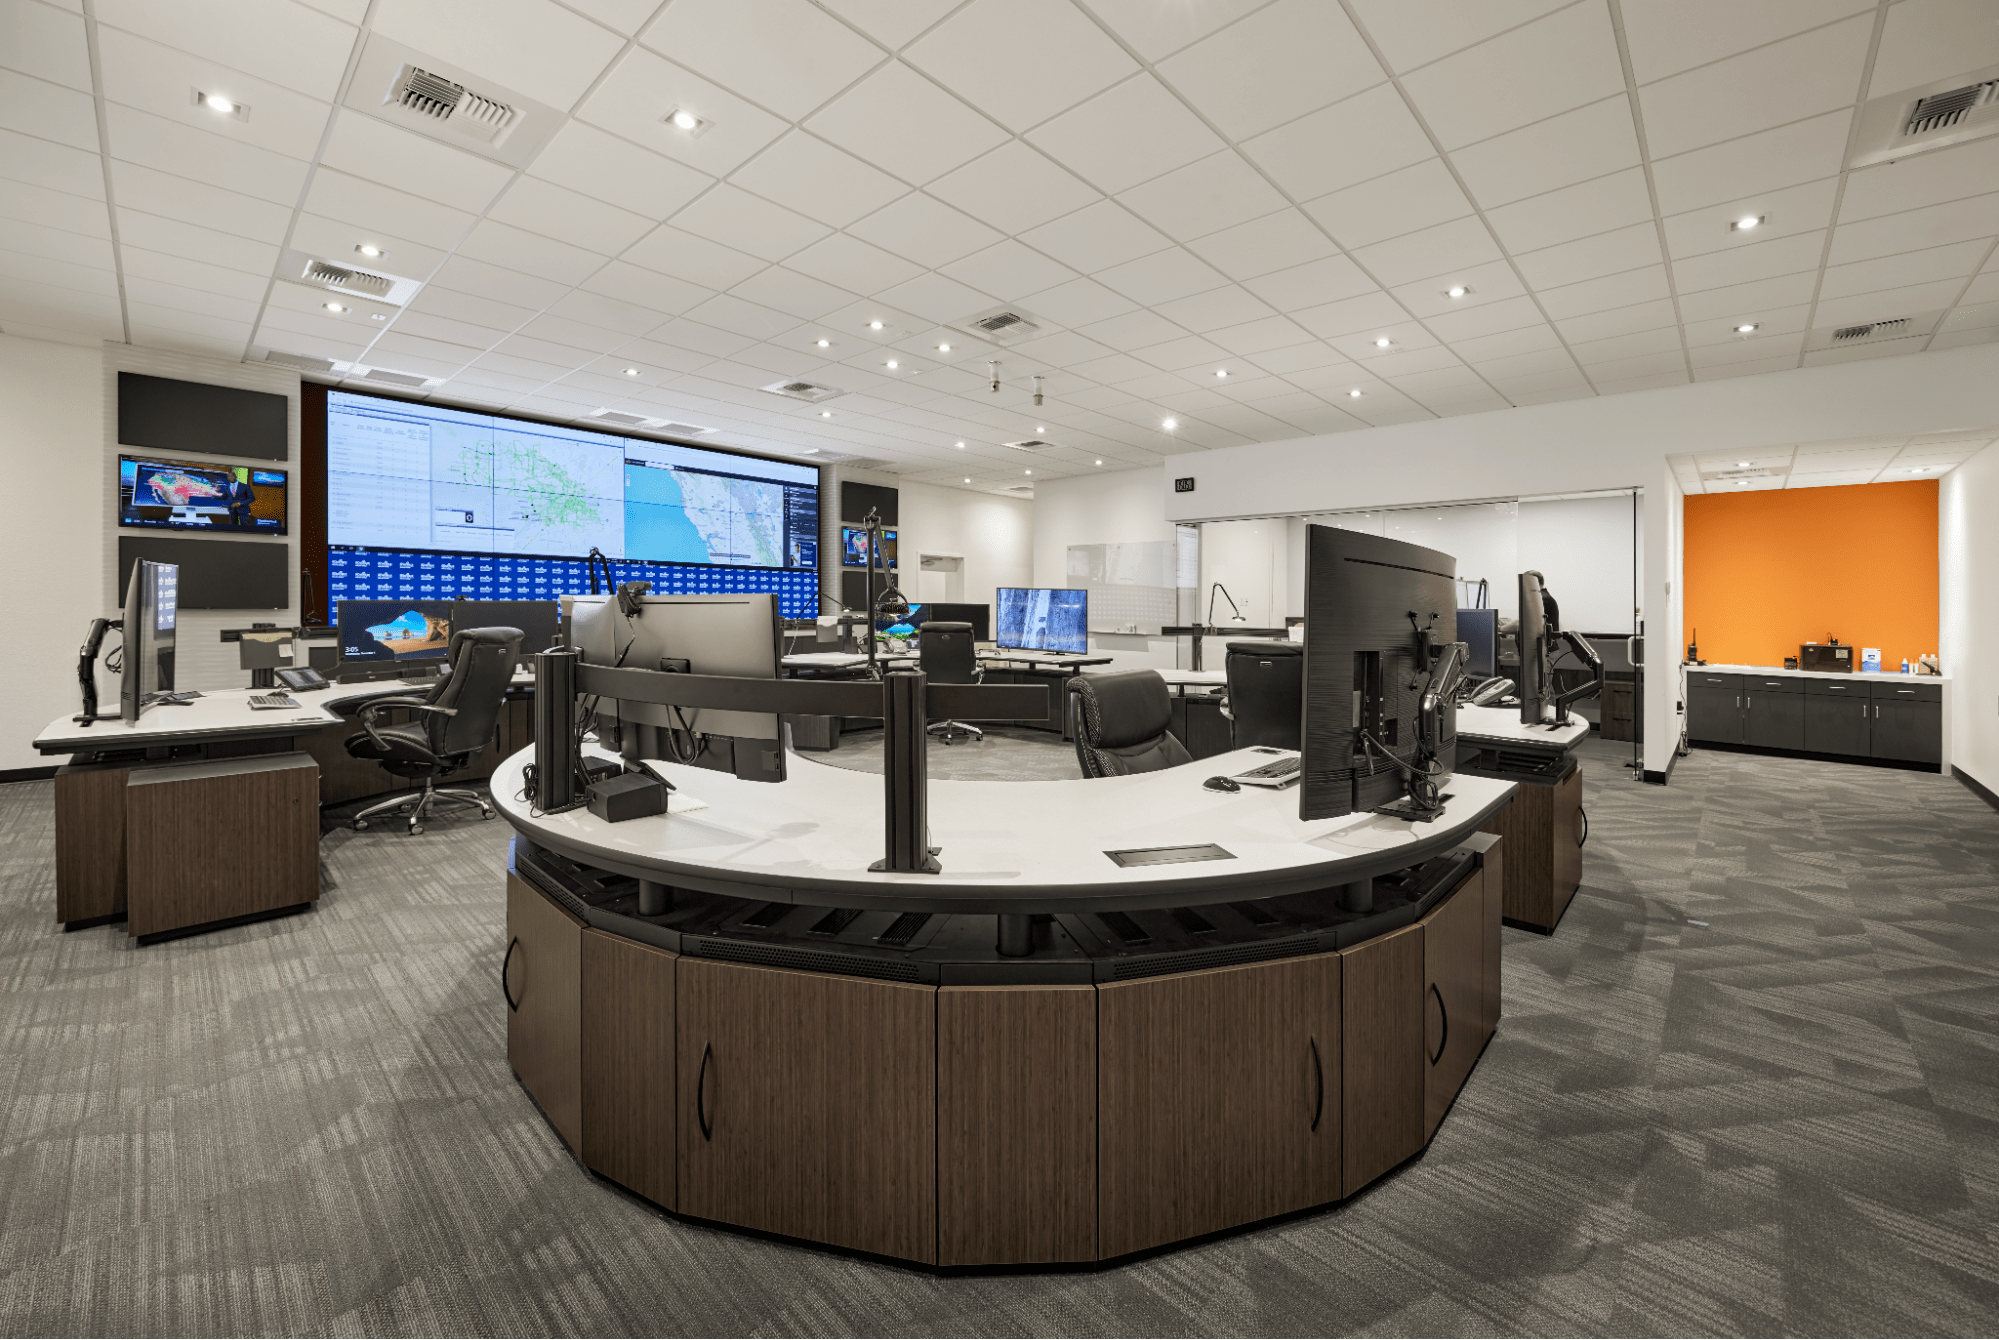 A wide view of a control room with computers and a video wall